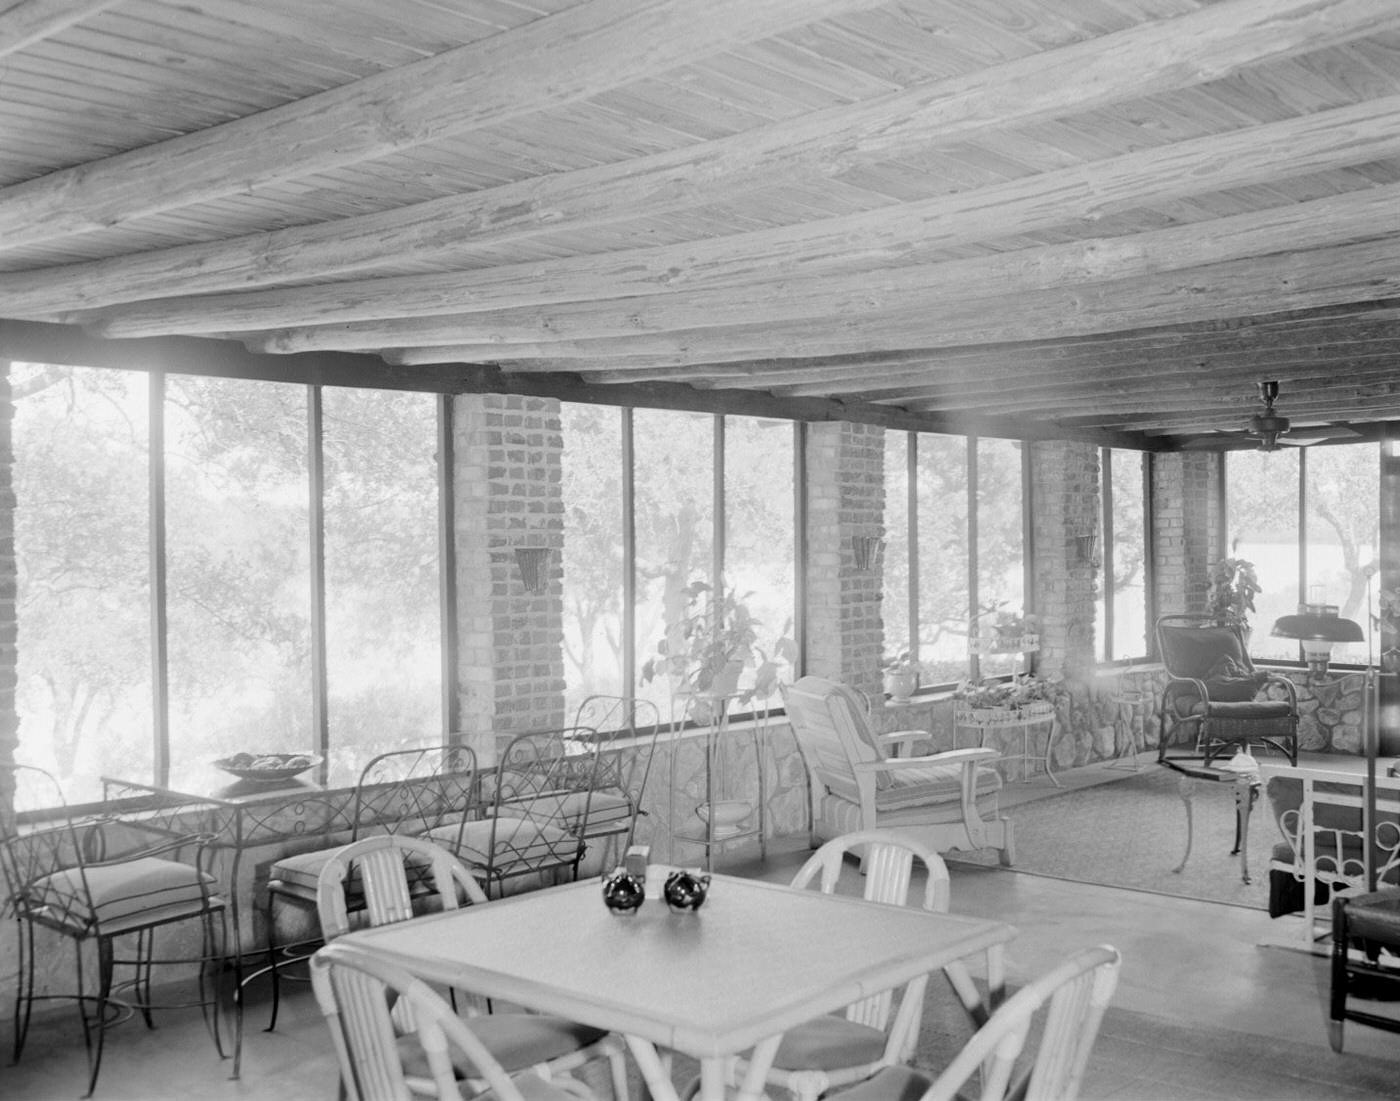 Interior of Paggi House Featuring Furnishings and Decor, 1957.